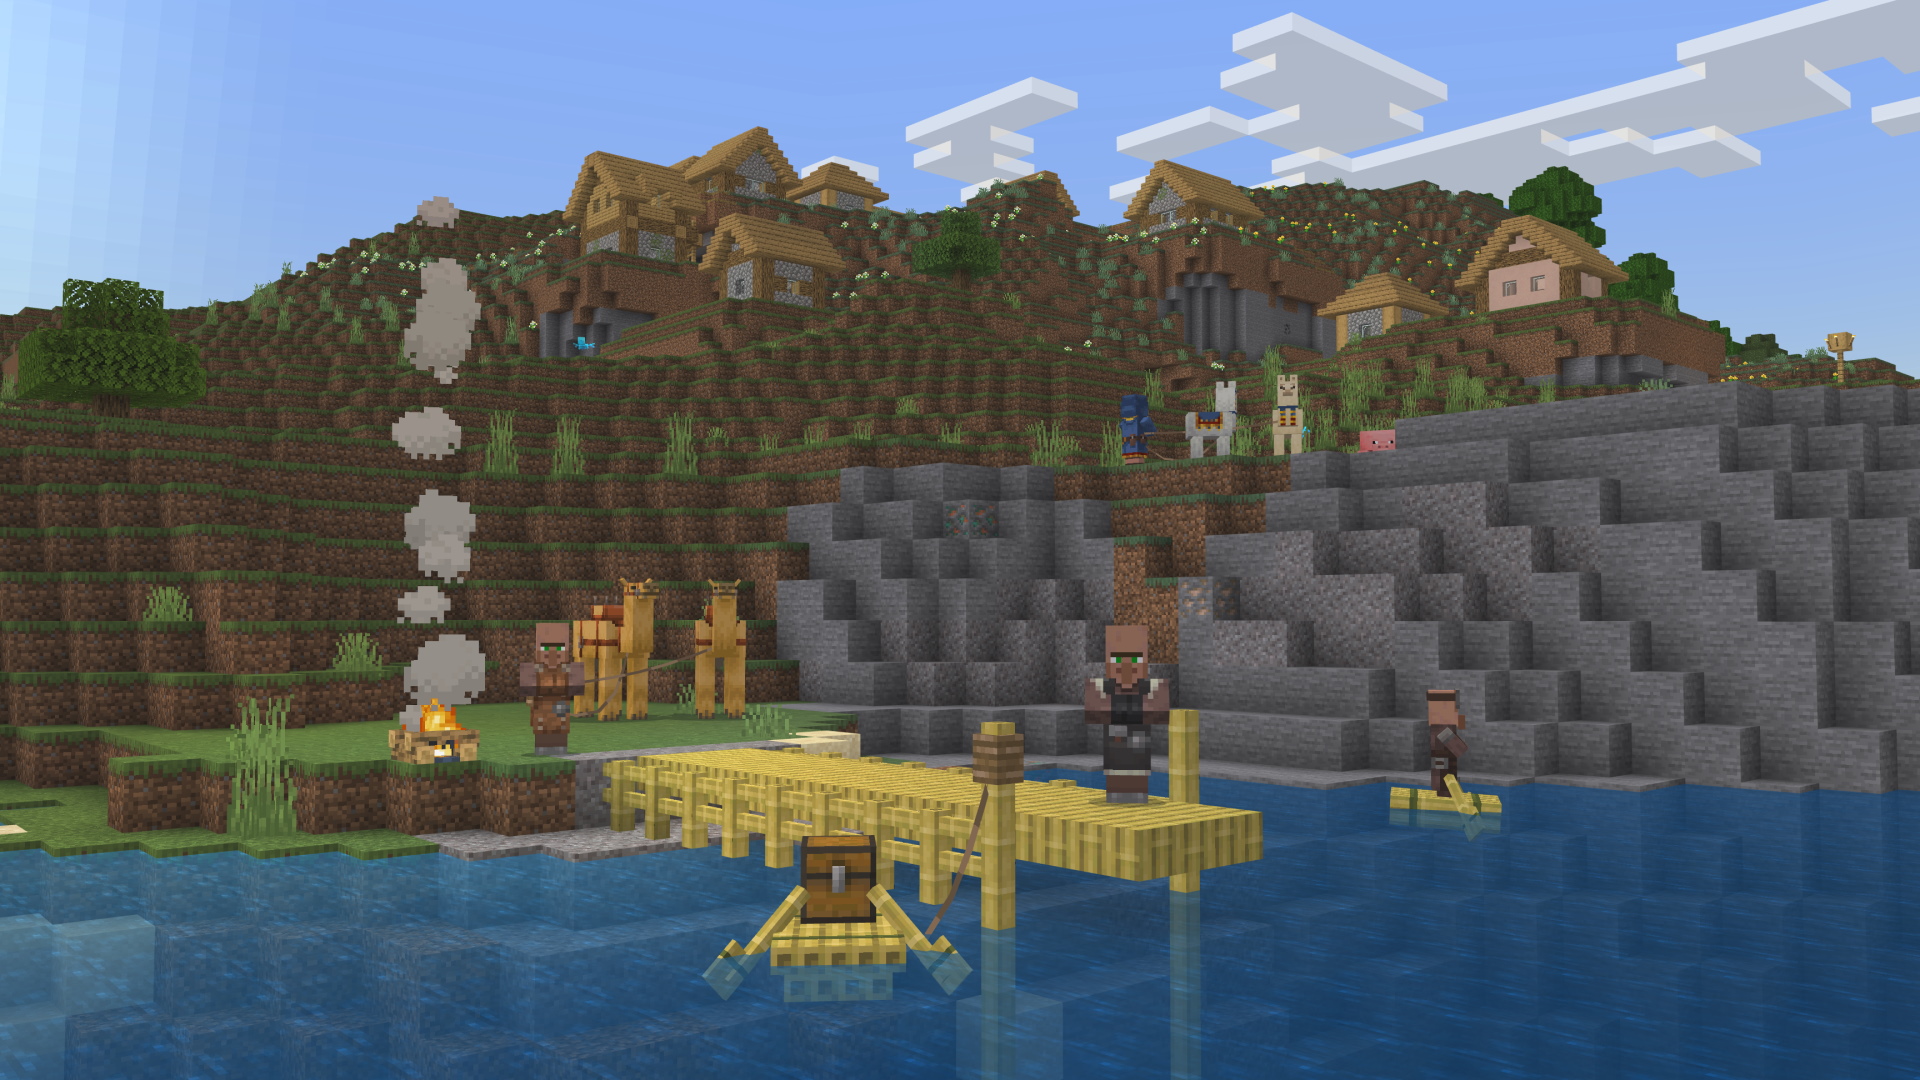 A Minecraft screenshot showing a bamboo raft, villagers, and camels, with a village on a hill in the background.